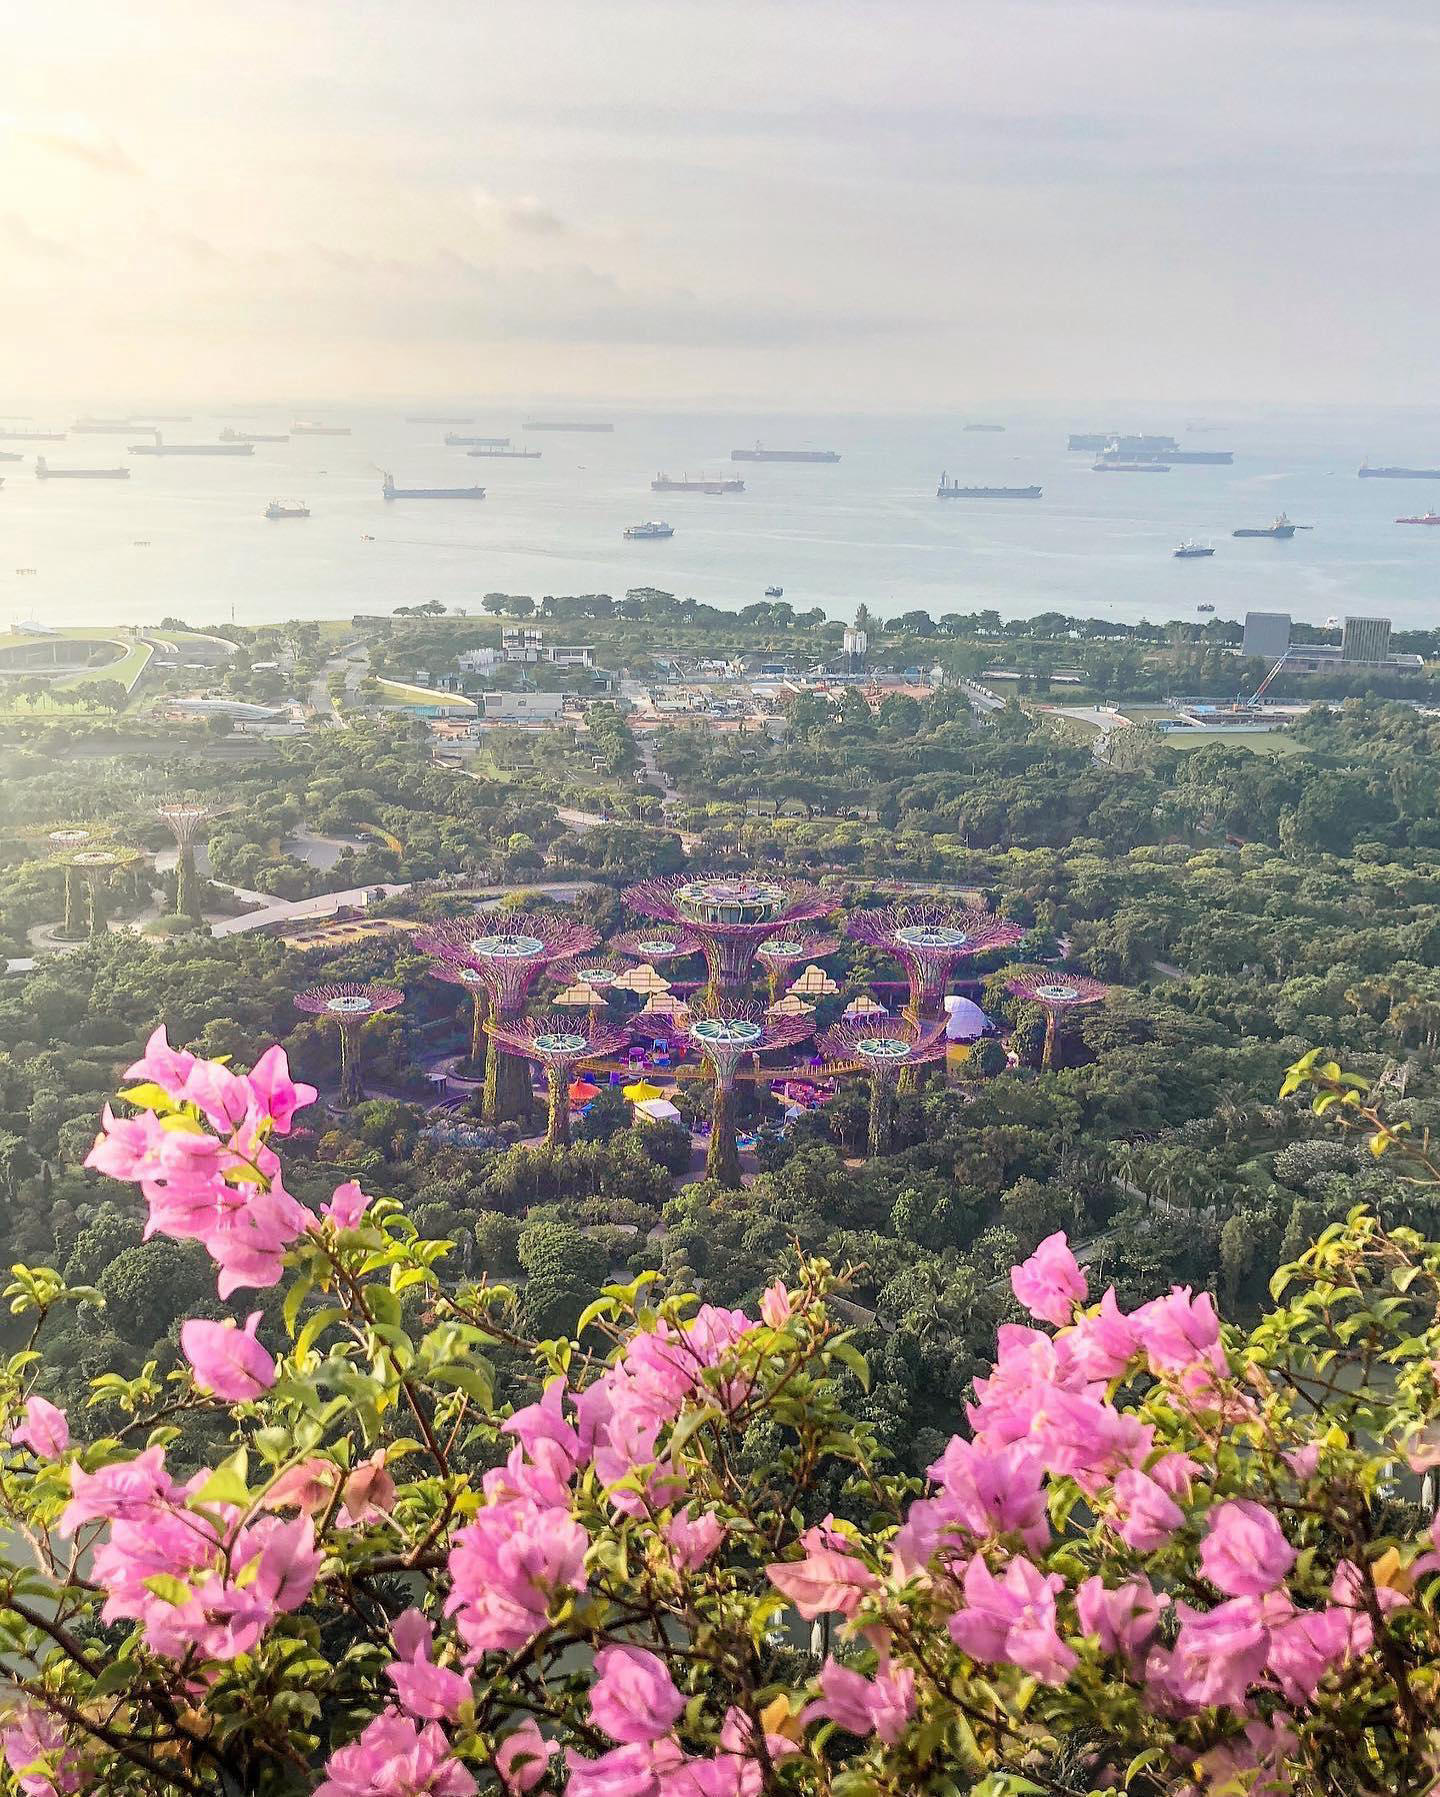 Singapore 🇸🇬 Travel | Hotels | Food | Tips - Bits and pieces of the magical Singapore through the